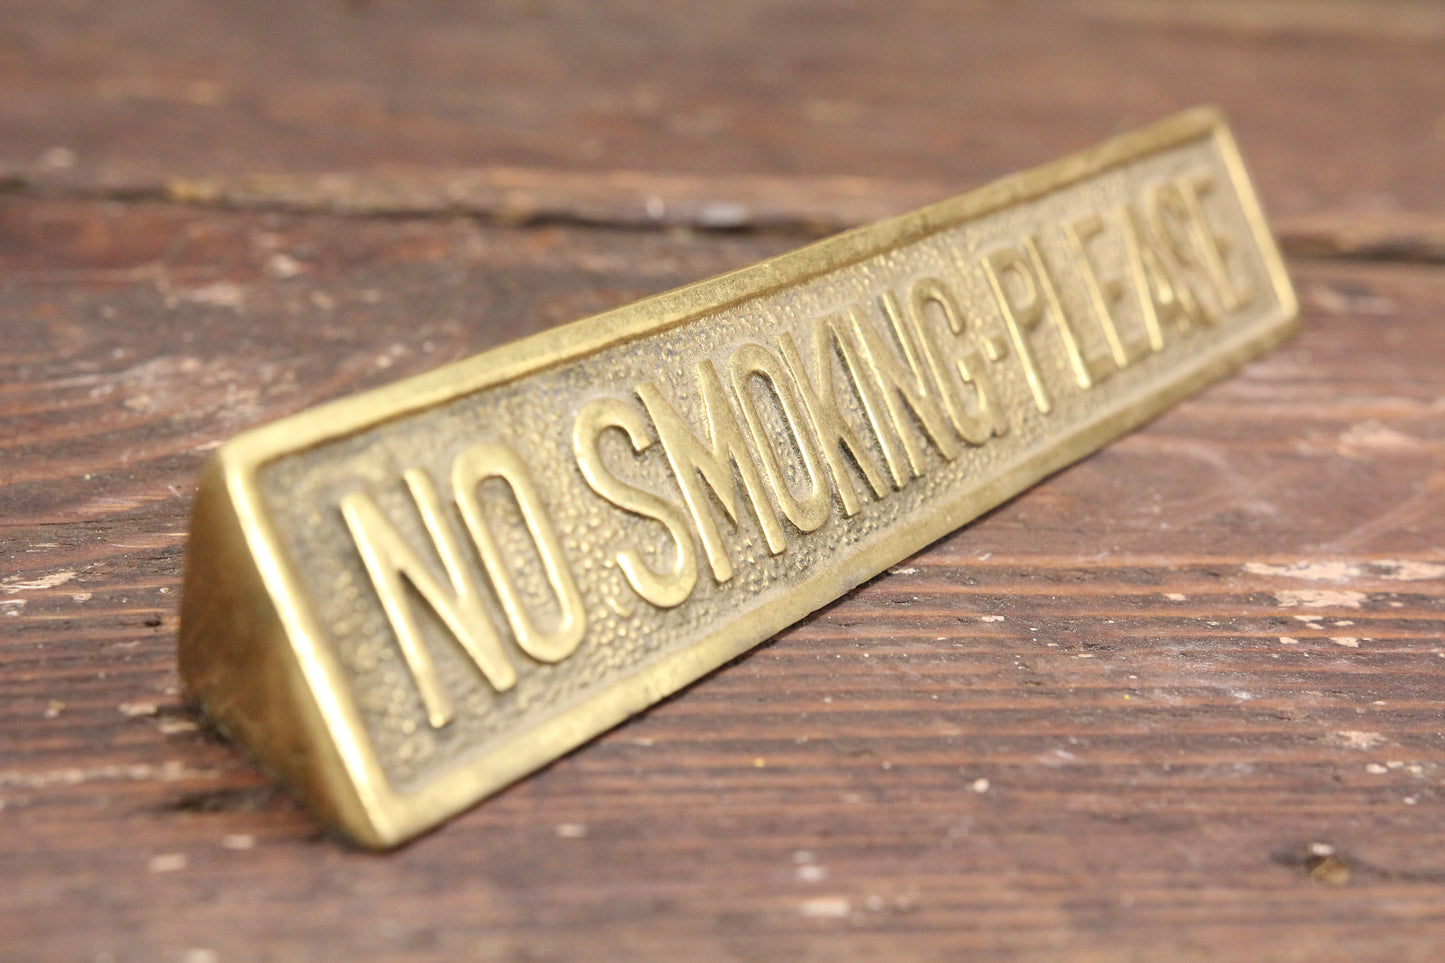 No Smoking Please Heavy Weighted Brass Desk Sign